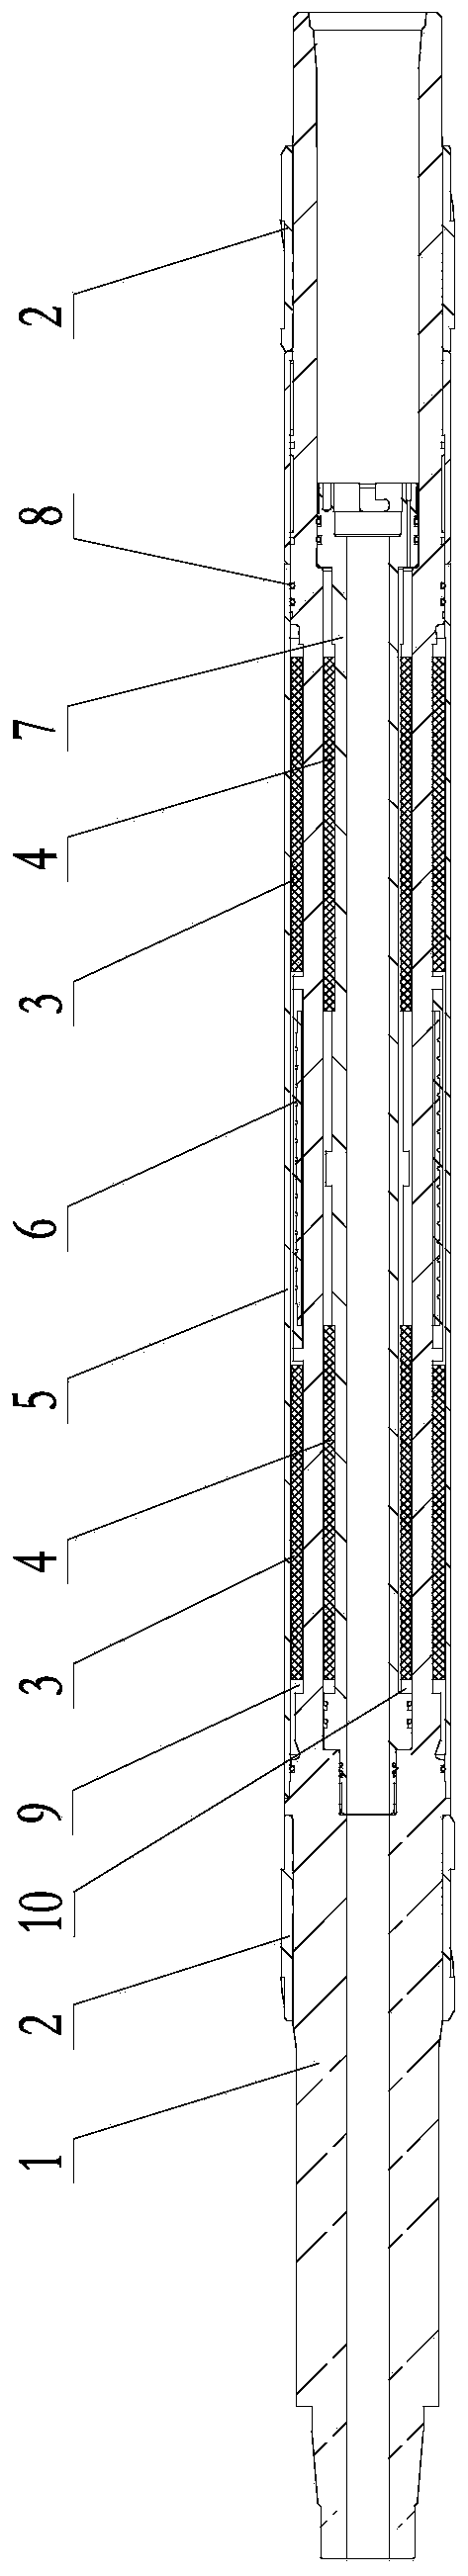 Drill collar structure of nuclear magnetism logging-while-drilling instrument